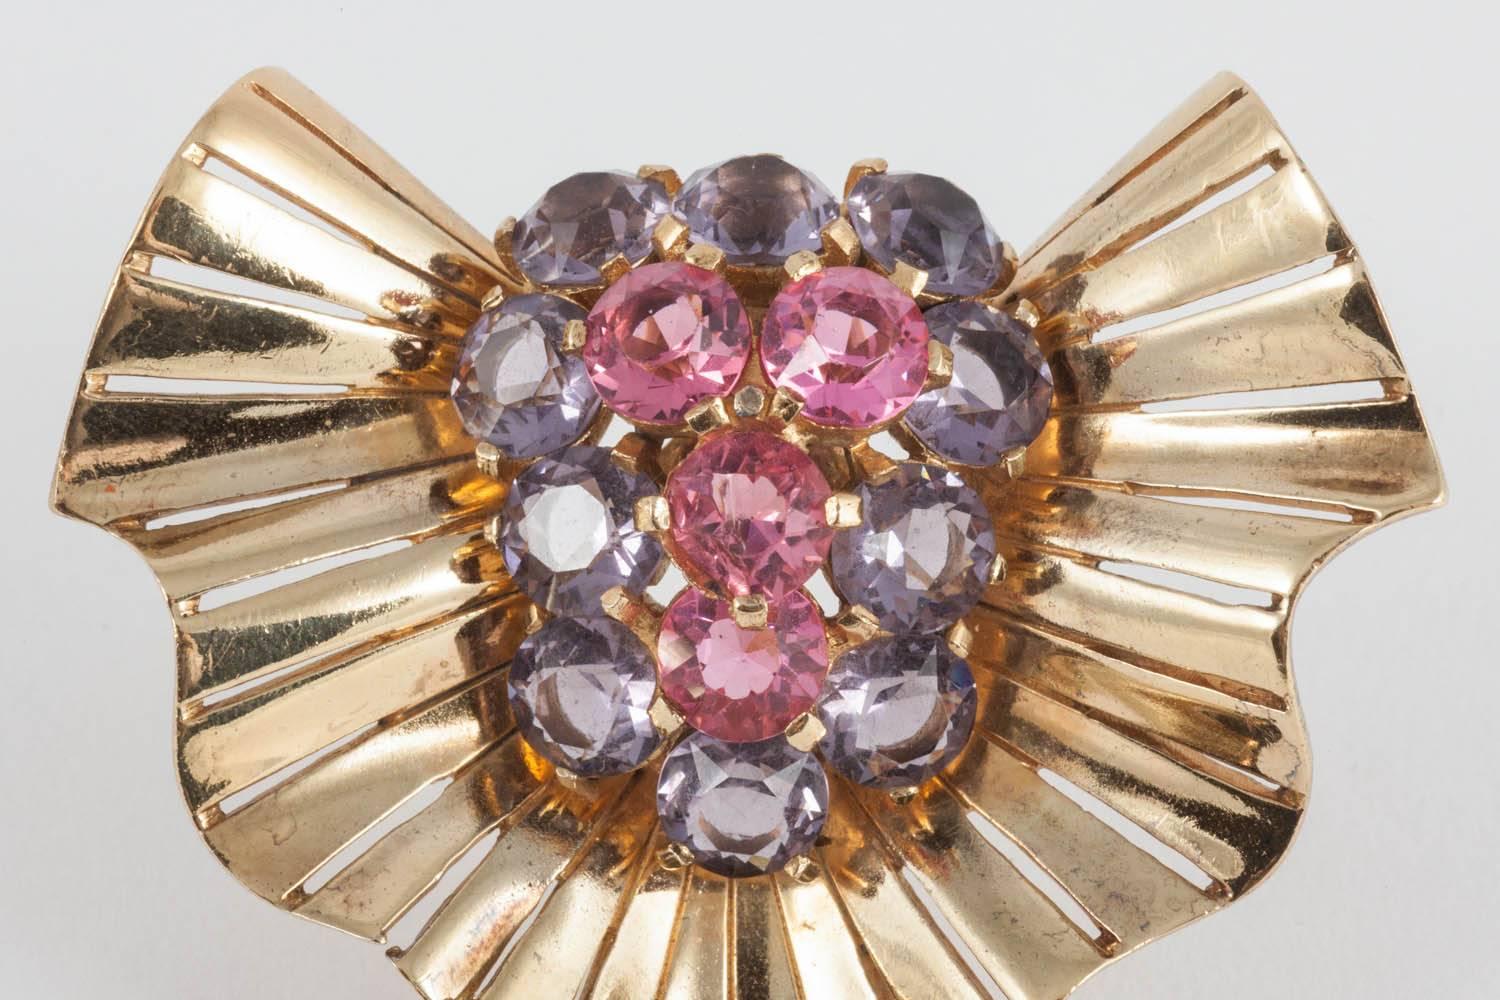 Beautiful abstract design in wave like gilded metal and the softest faceted hues of pink/rose and lilac/amethyst creating a  wonderful 'cocktail' brooch from Marcel Boucher in the 1940s. Signed on the reverse with the MB Phrygian symbol. An ideal